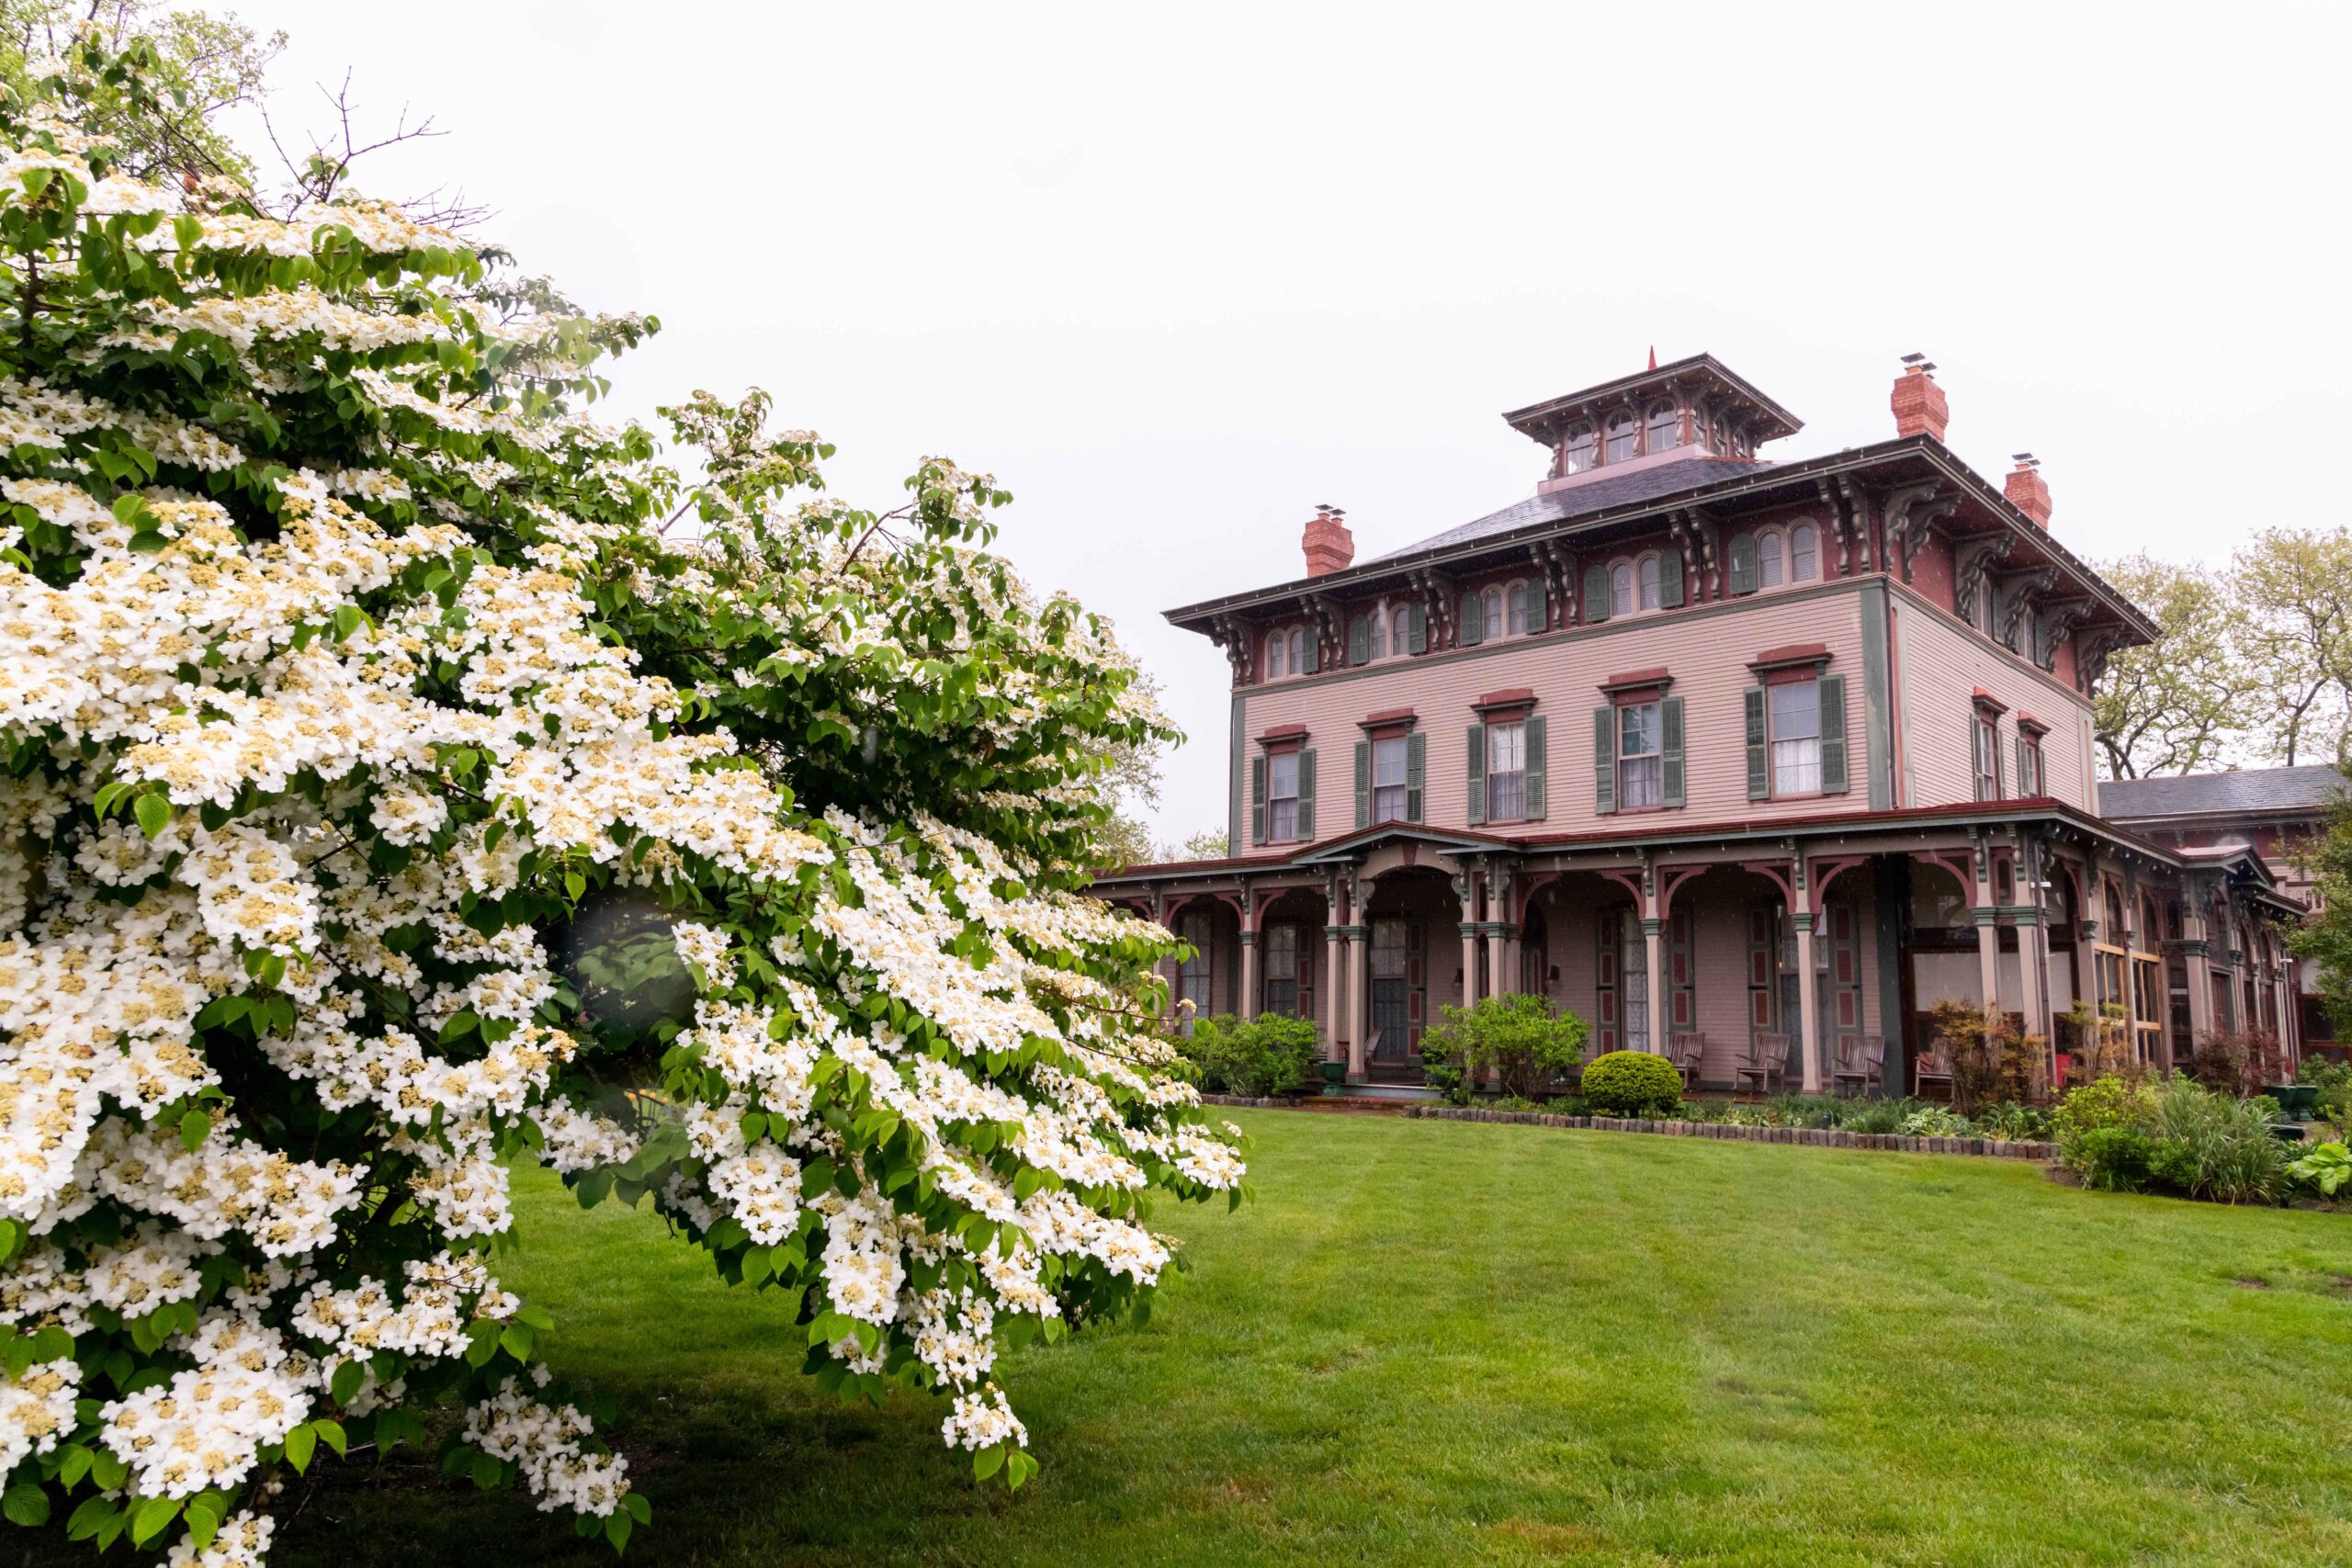 A white flowered dogwood tree in front of the Southern Mansion, a pink, red and green Victorian styled bed and breakfast, with a grey cloudy sky